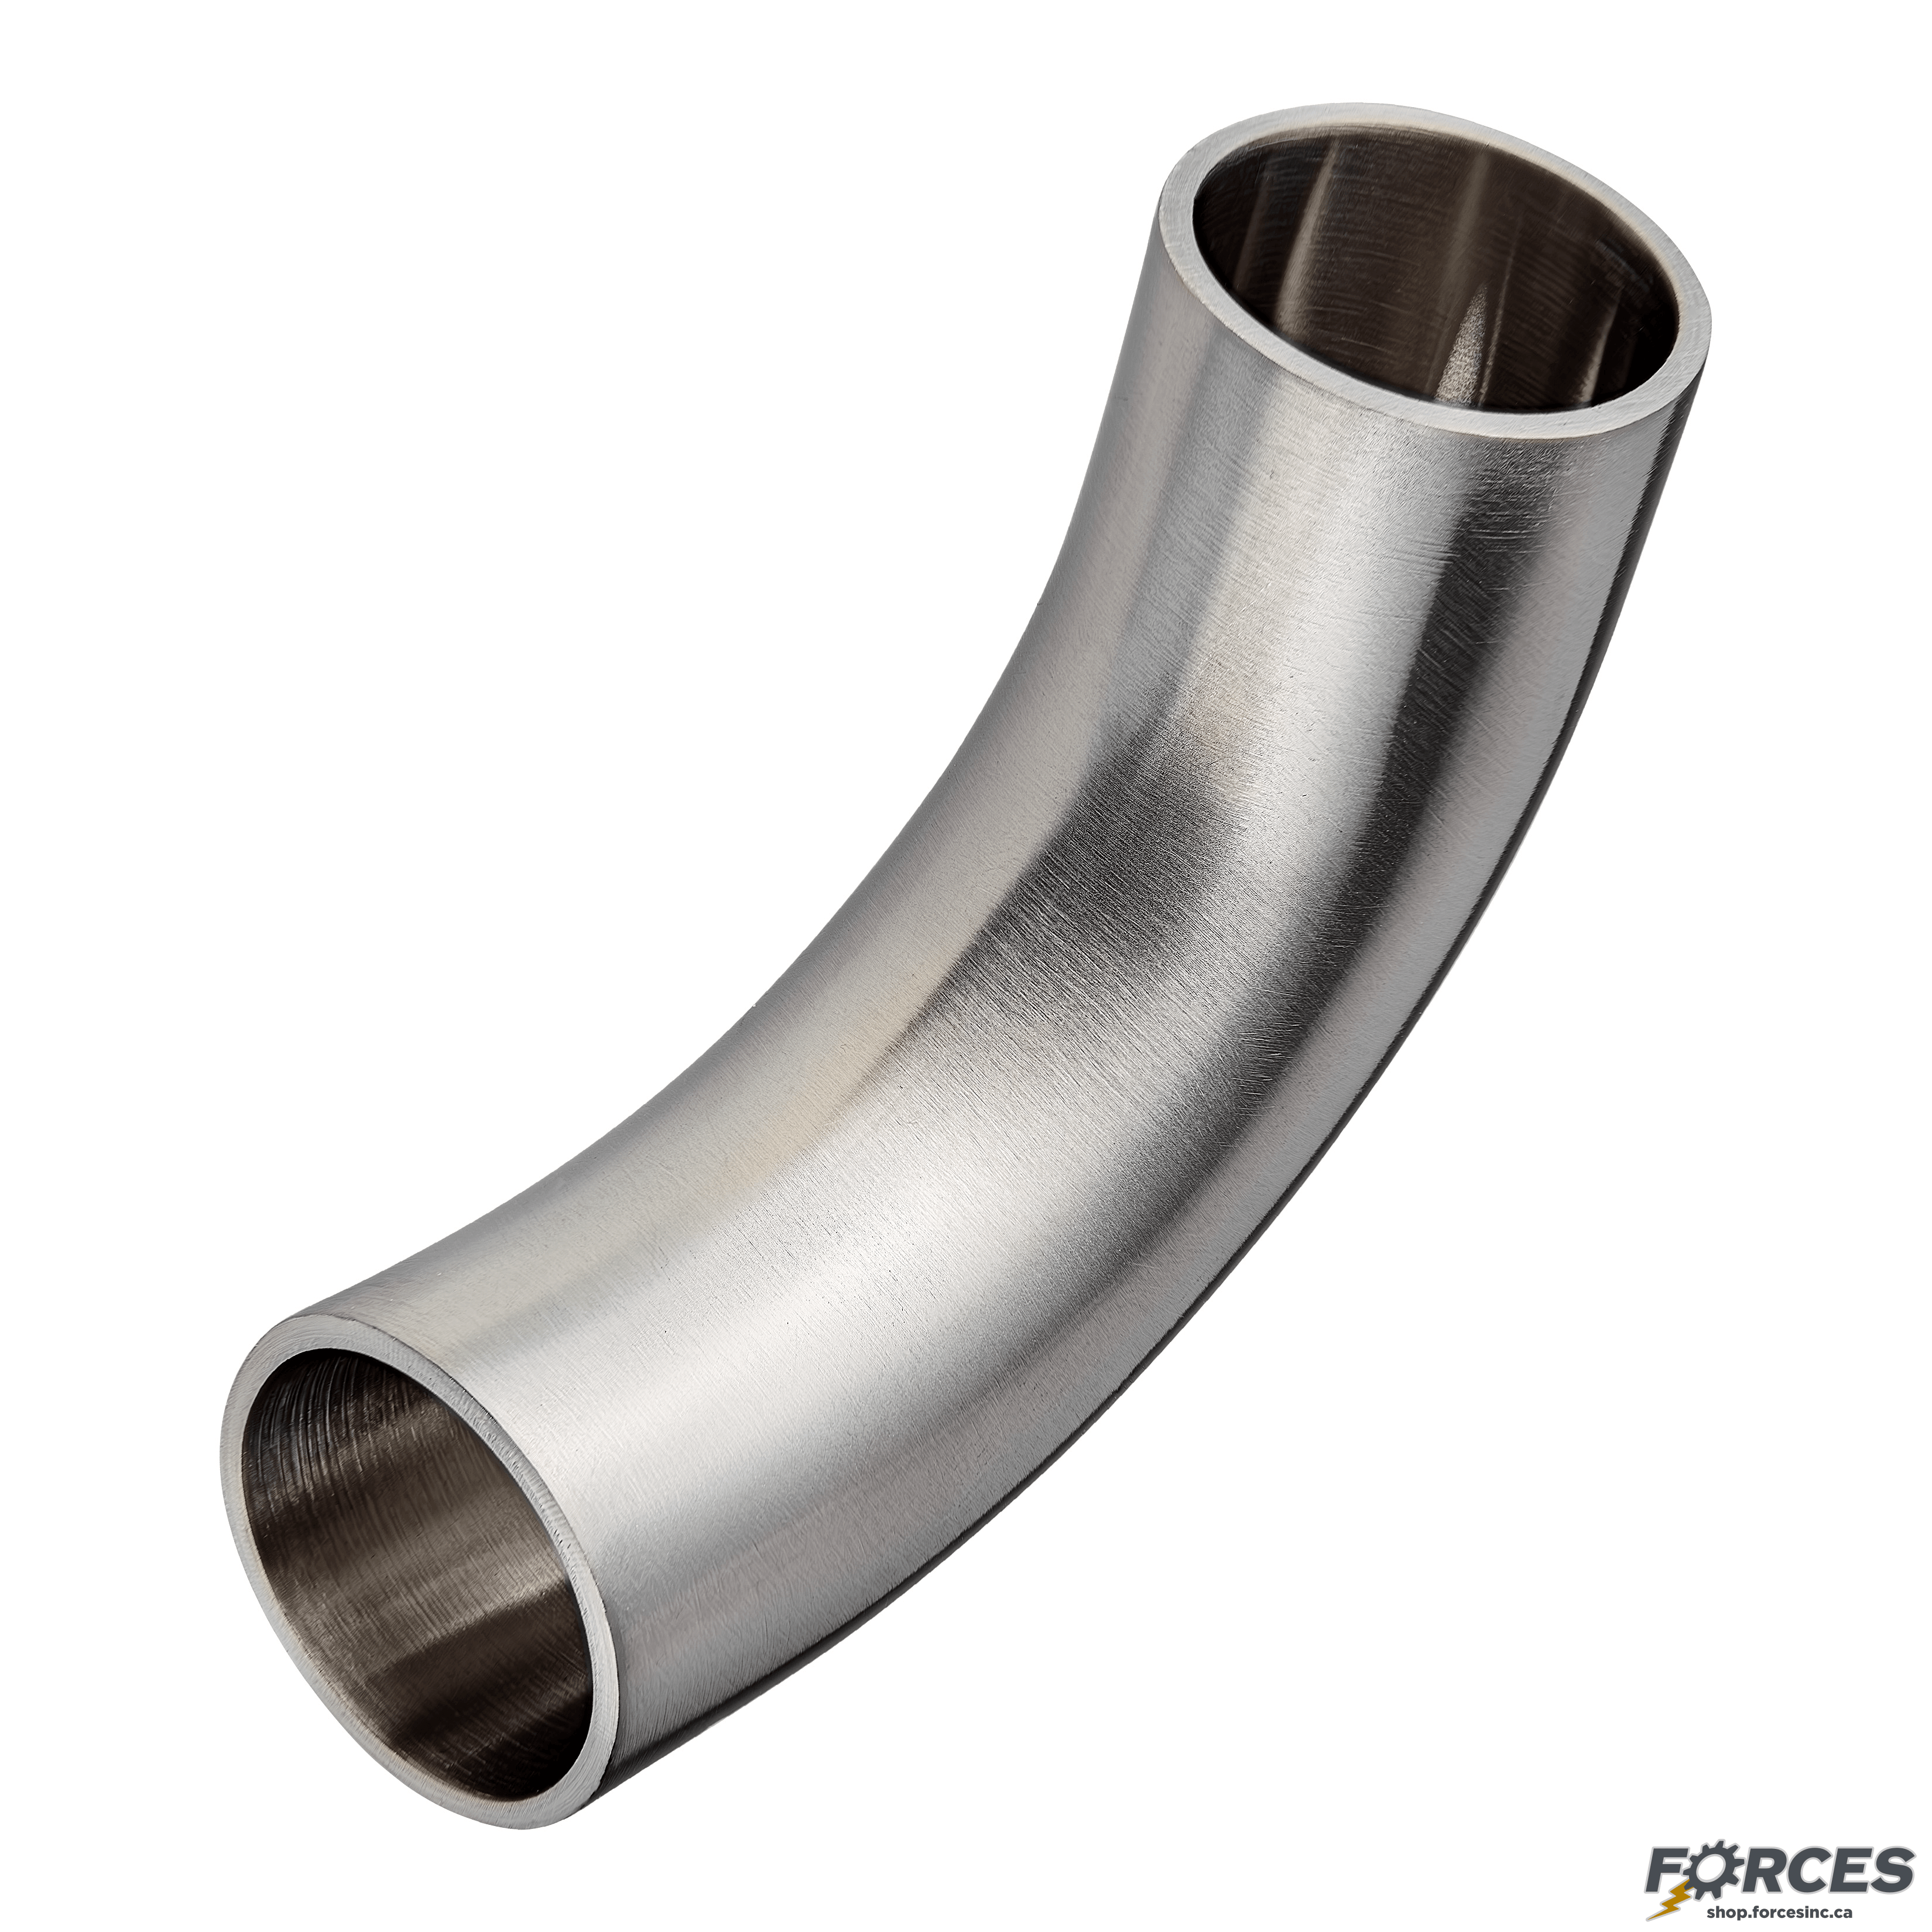 3" Butt Weld 90° Elbow Long Tangent - Stainless Steel 304 - Forces Inc